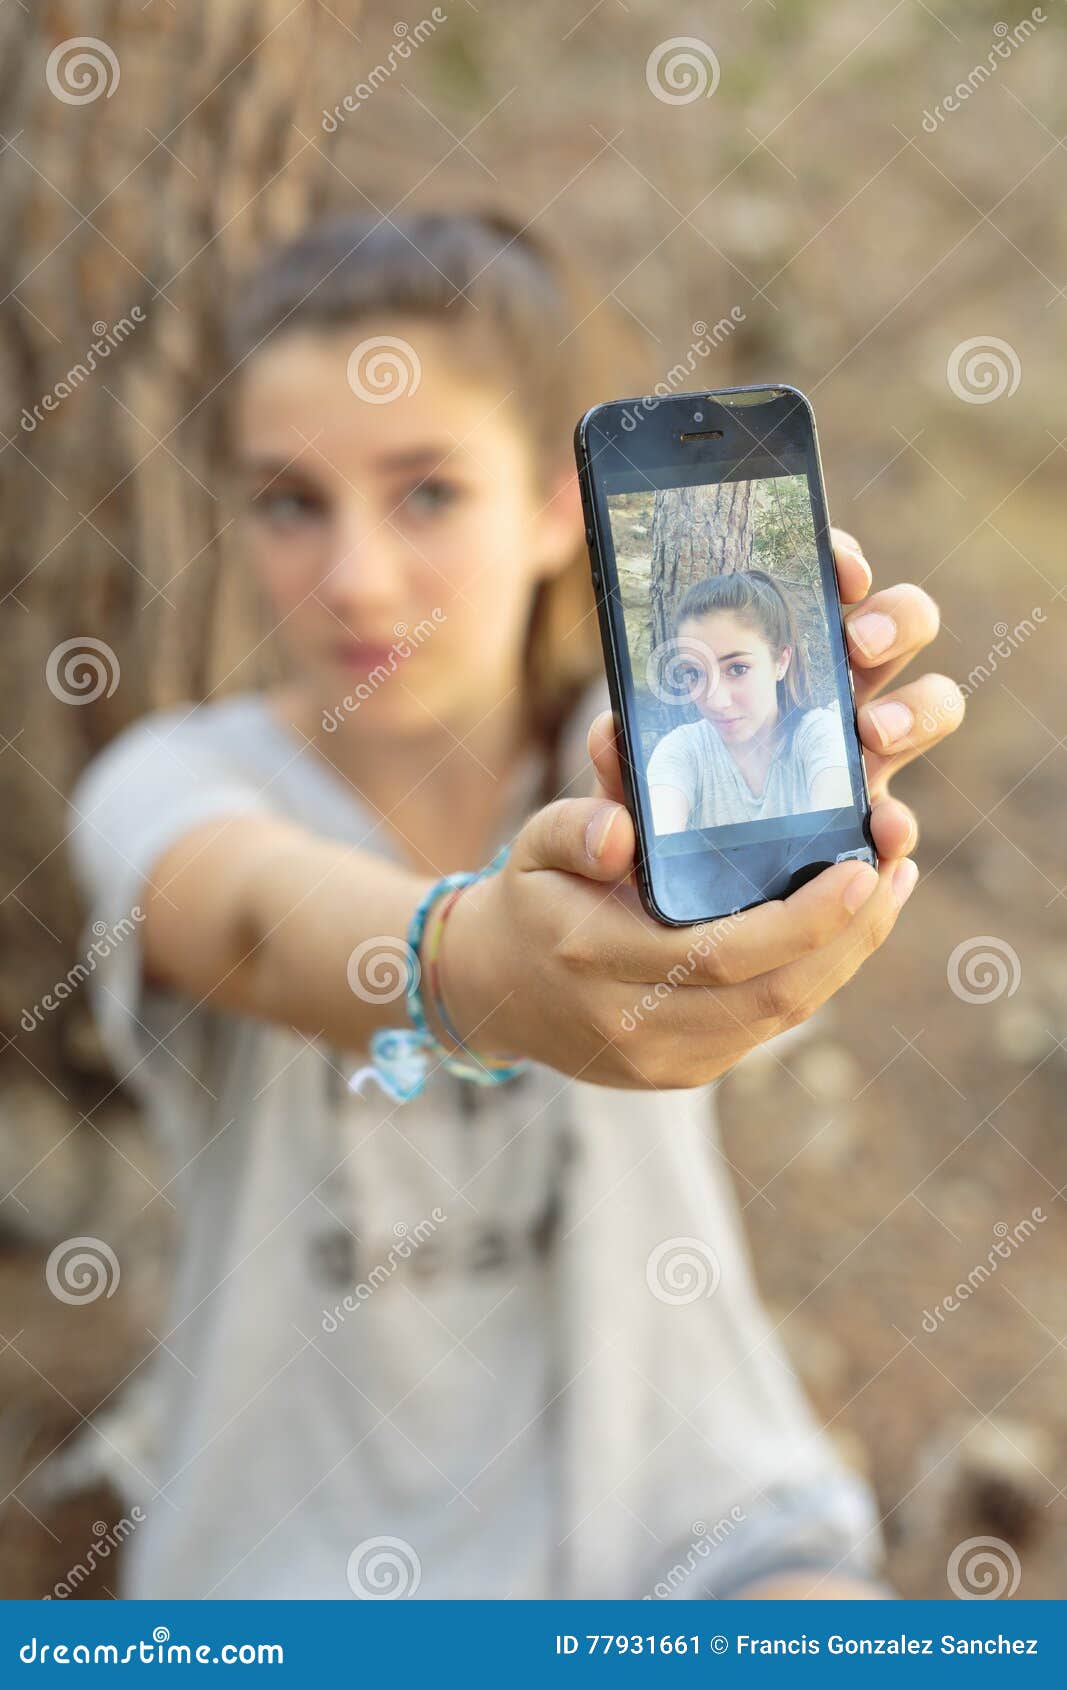 teenager taking photos with your mobile